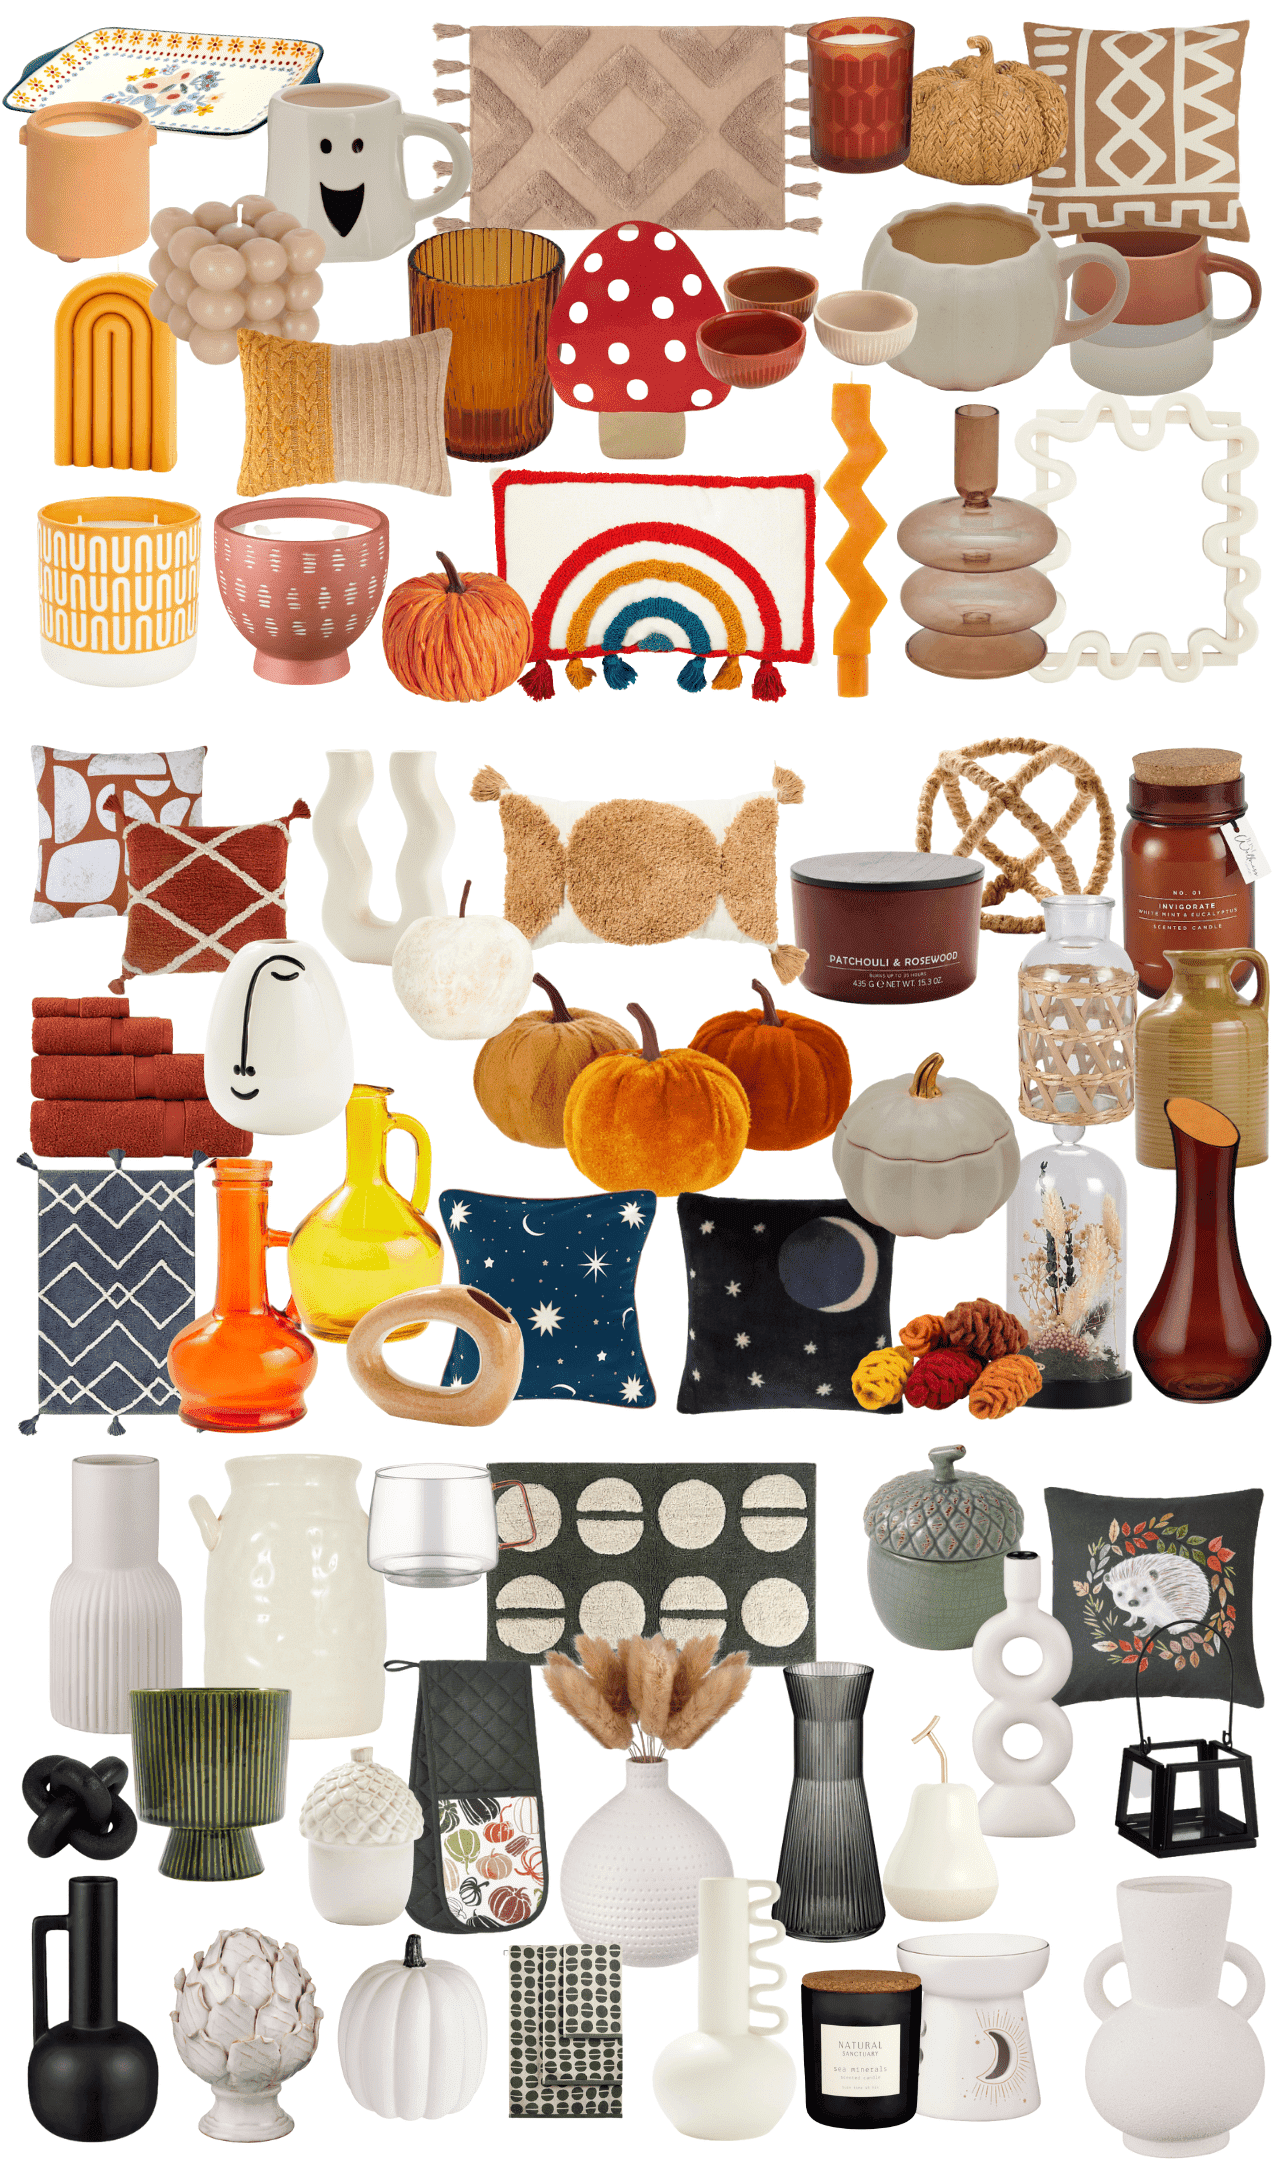 Budget decor inspiration for Autumn Fall 2022, high street cushions, wreaths and vases to update your home on a small budget